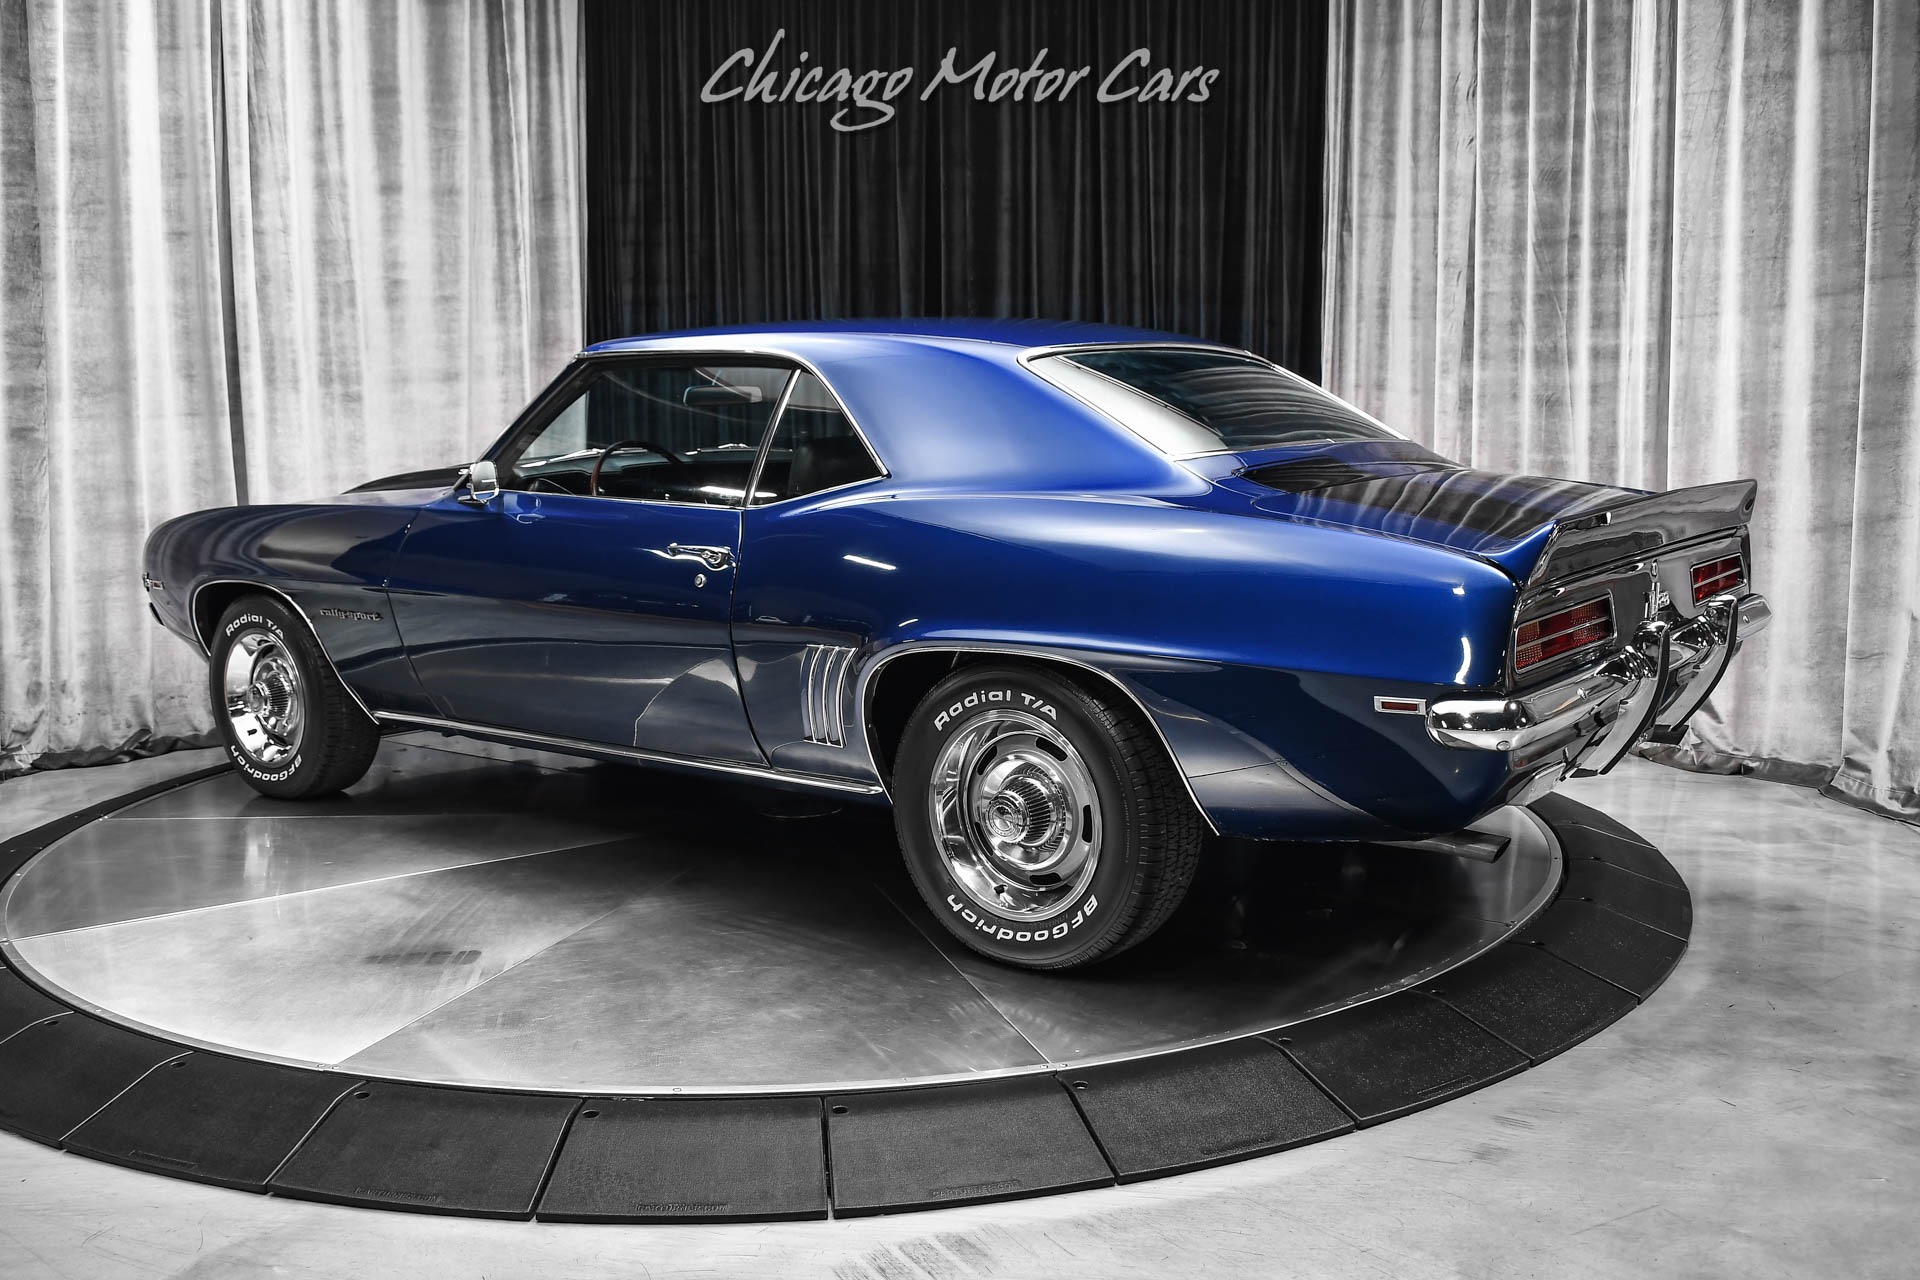 Used-1969-Chevrolet-Camaro-Z28-RS-Coupe-Frame-Off-Restoration-4-Speed-Manual-Stunning